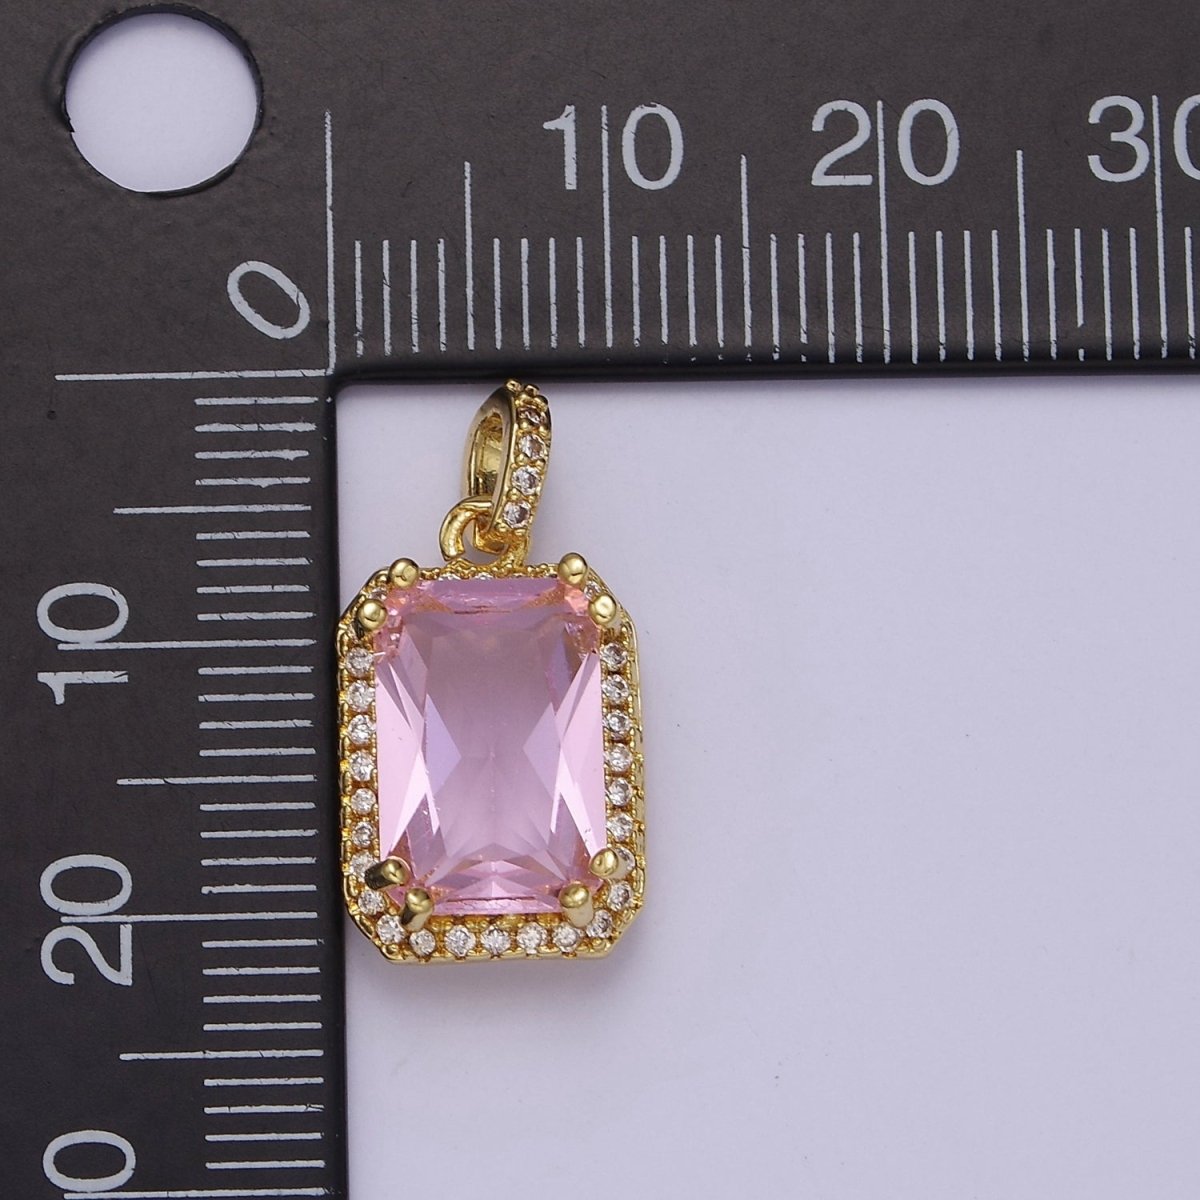 Gold Micro Pave Baby Pink Baguette Cubic Zirconia Pendant For Jewelry Necklace Making J-530 - DLUXCA